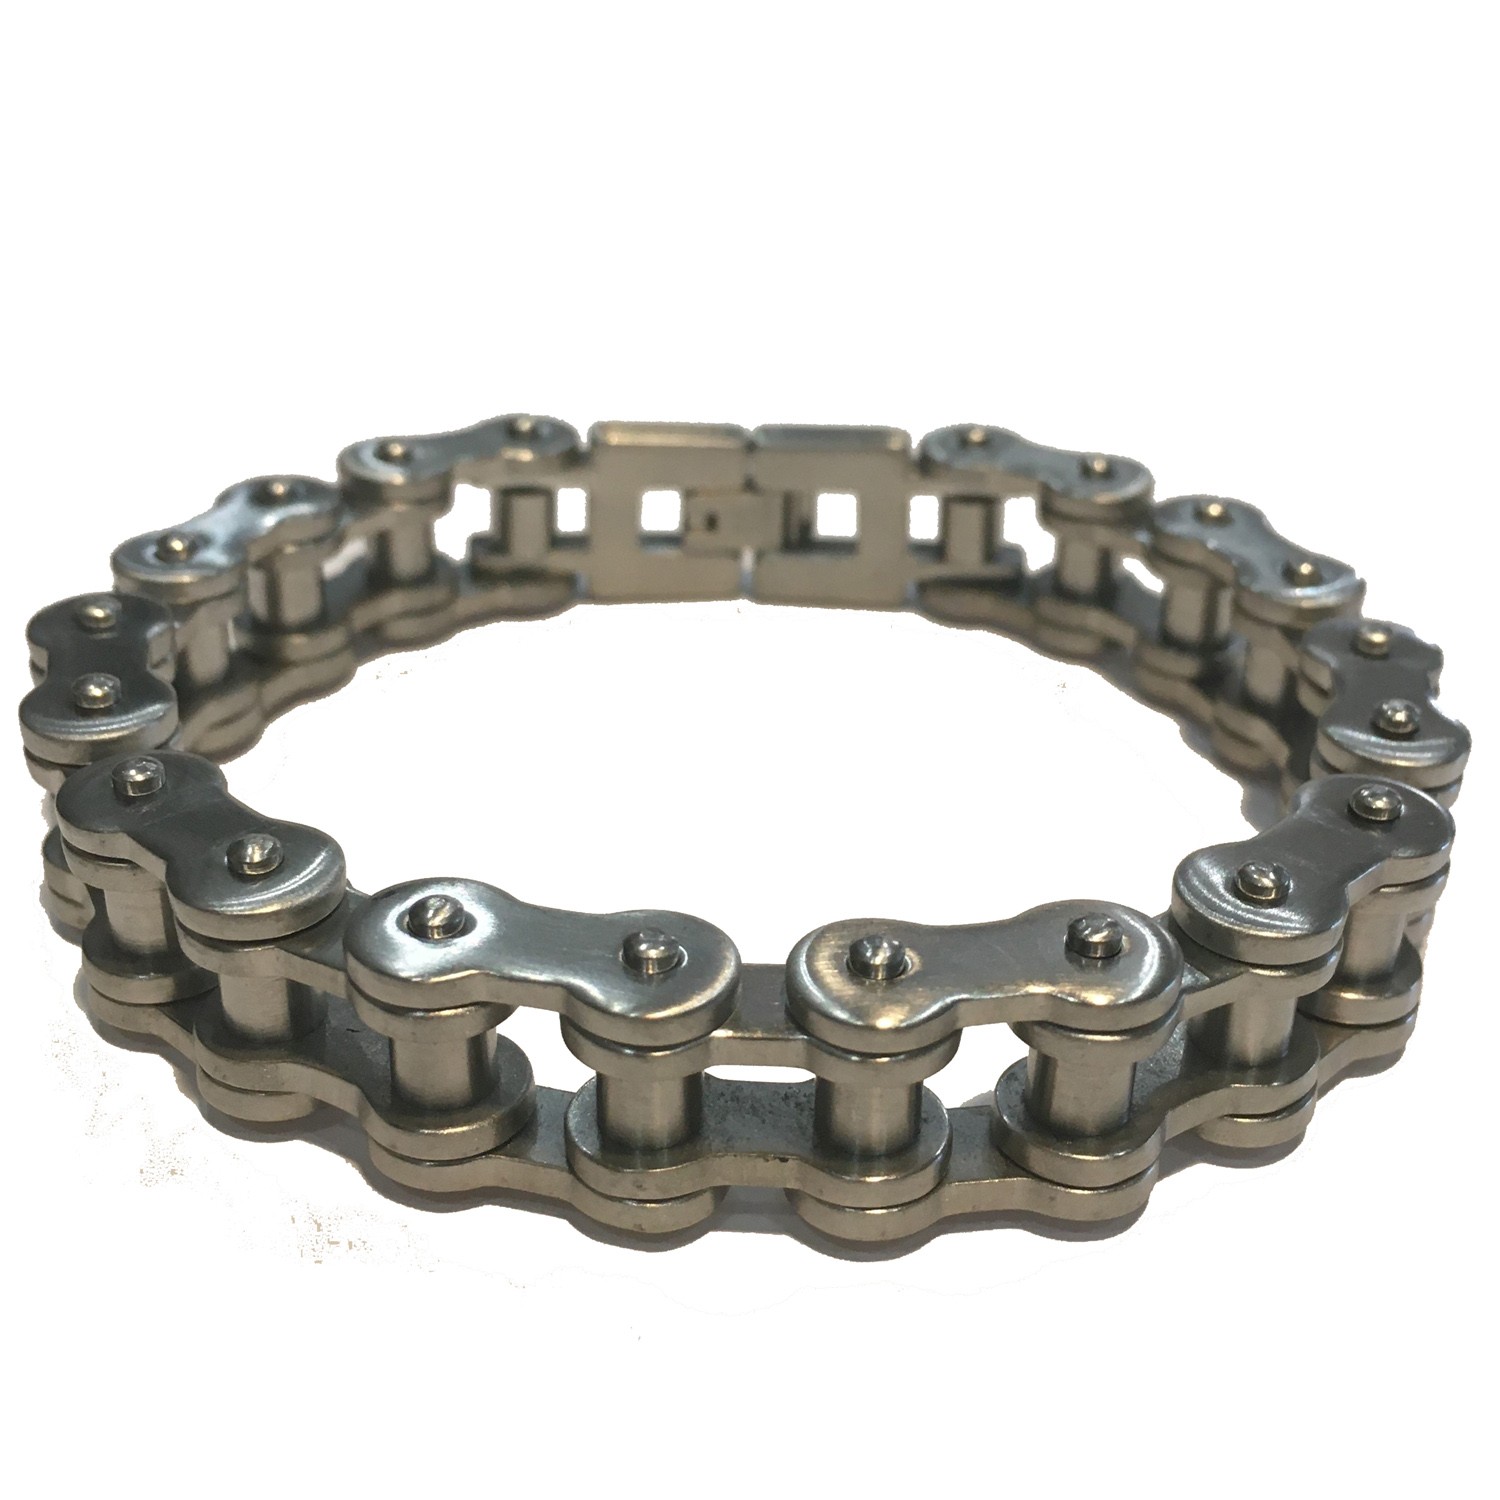 BRUSHED SILVER MENS MOTORCYCLE CHAIN BRACELET STAINLESS STEEL 9